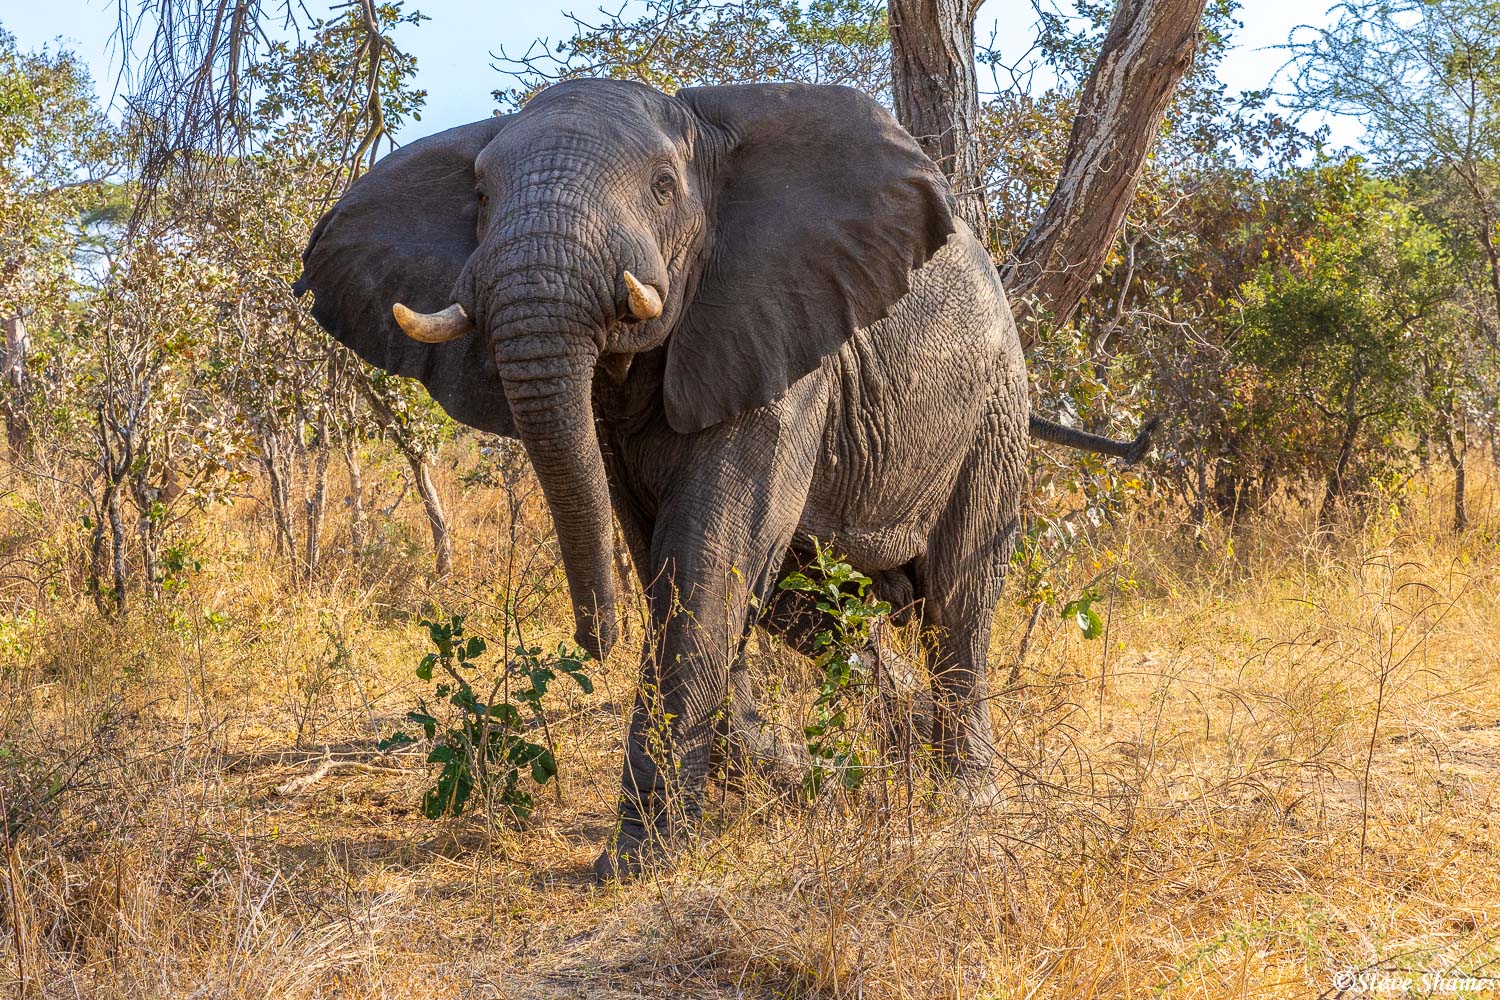 An elephant just to our side, watching us. At Katavi National Park there are not many visitors, so the elephants are not that...